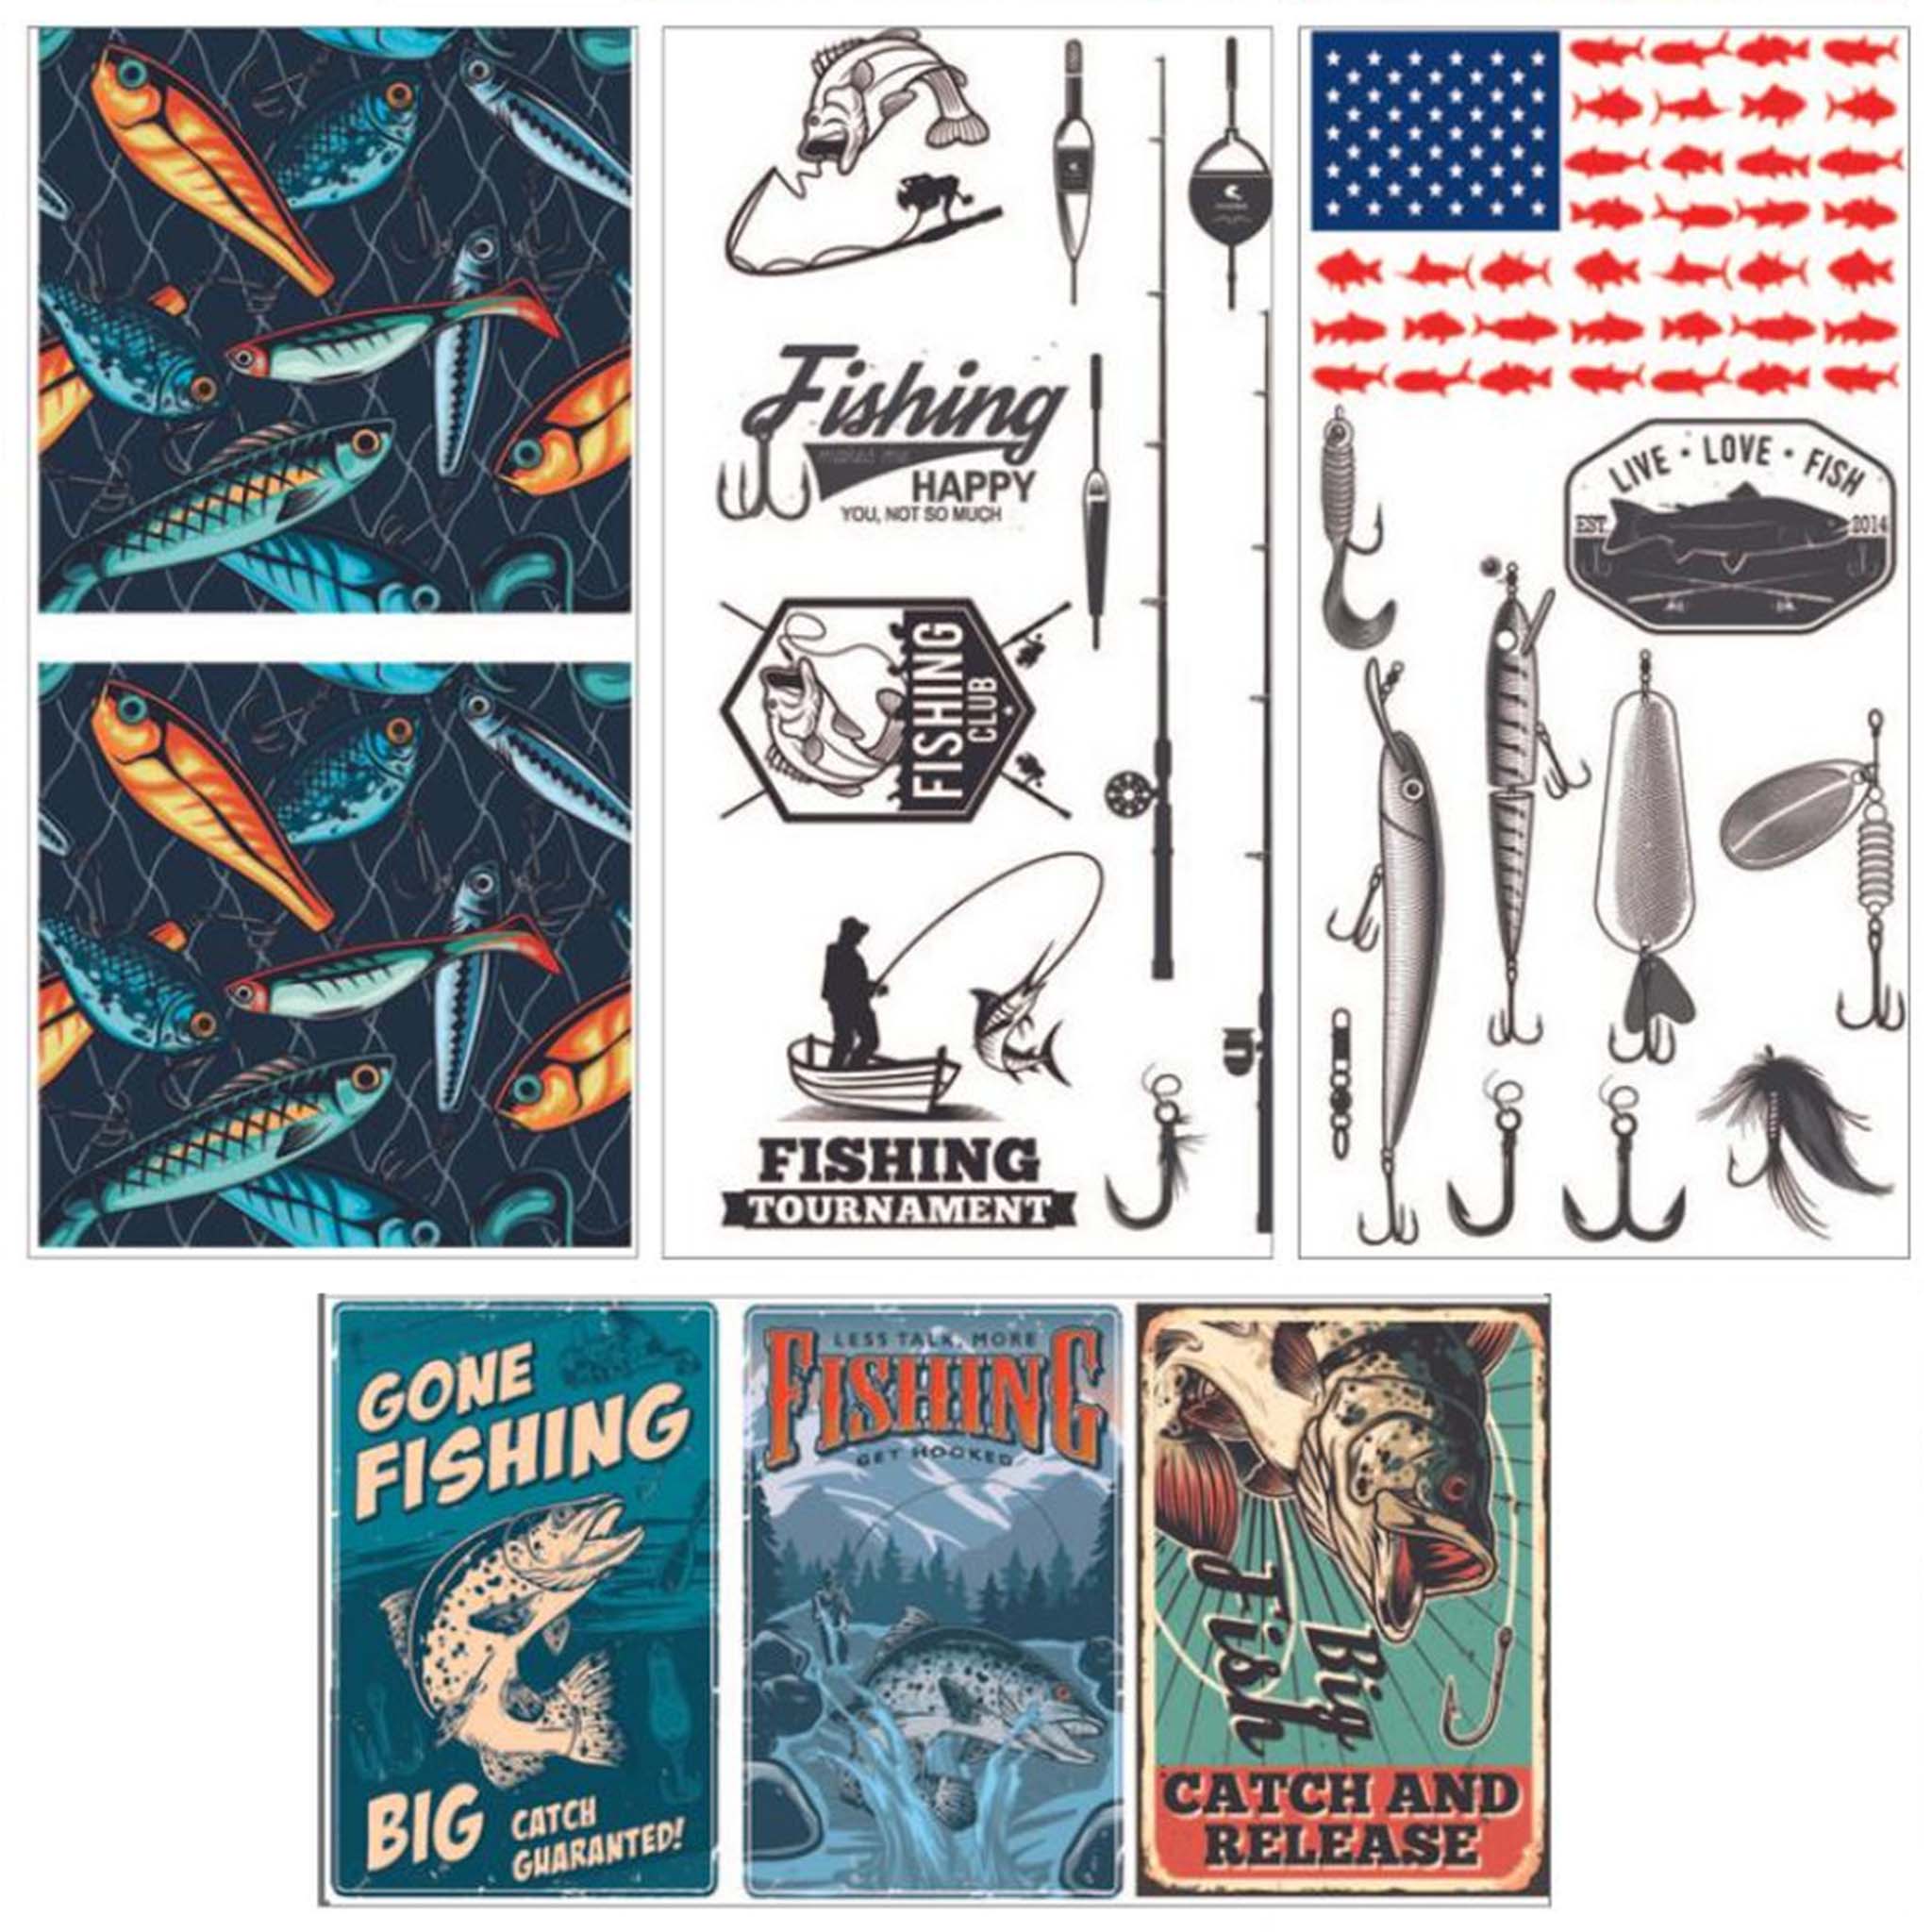 Four sheets of small rub-on transfers against a white background feature an American flag made entirely of fish, 3 fishing posters, images of lures, and inspiring fishing quotes.